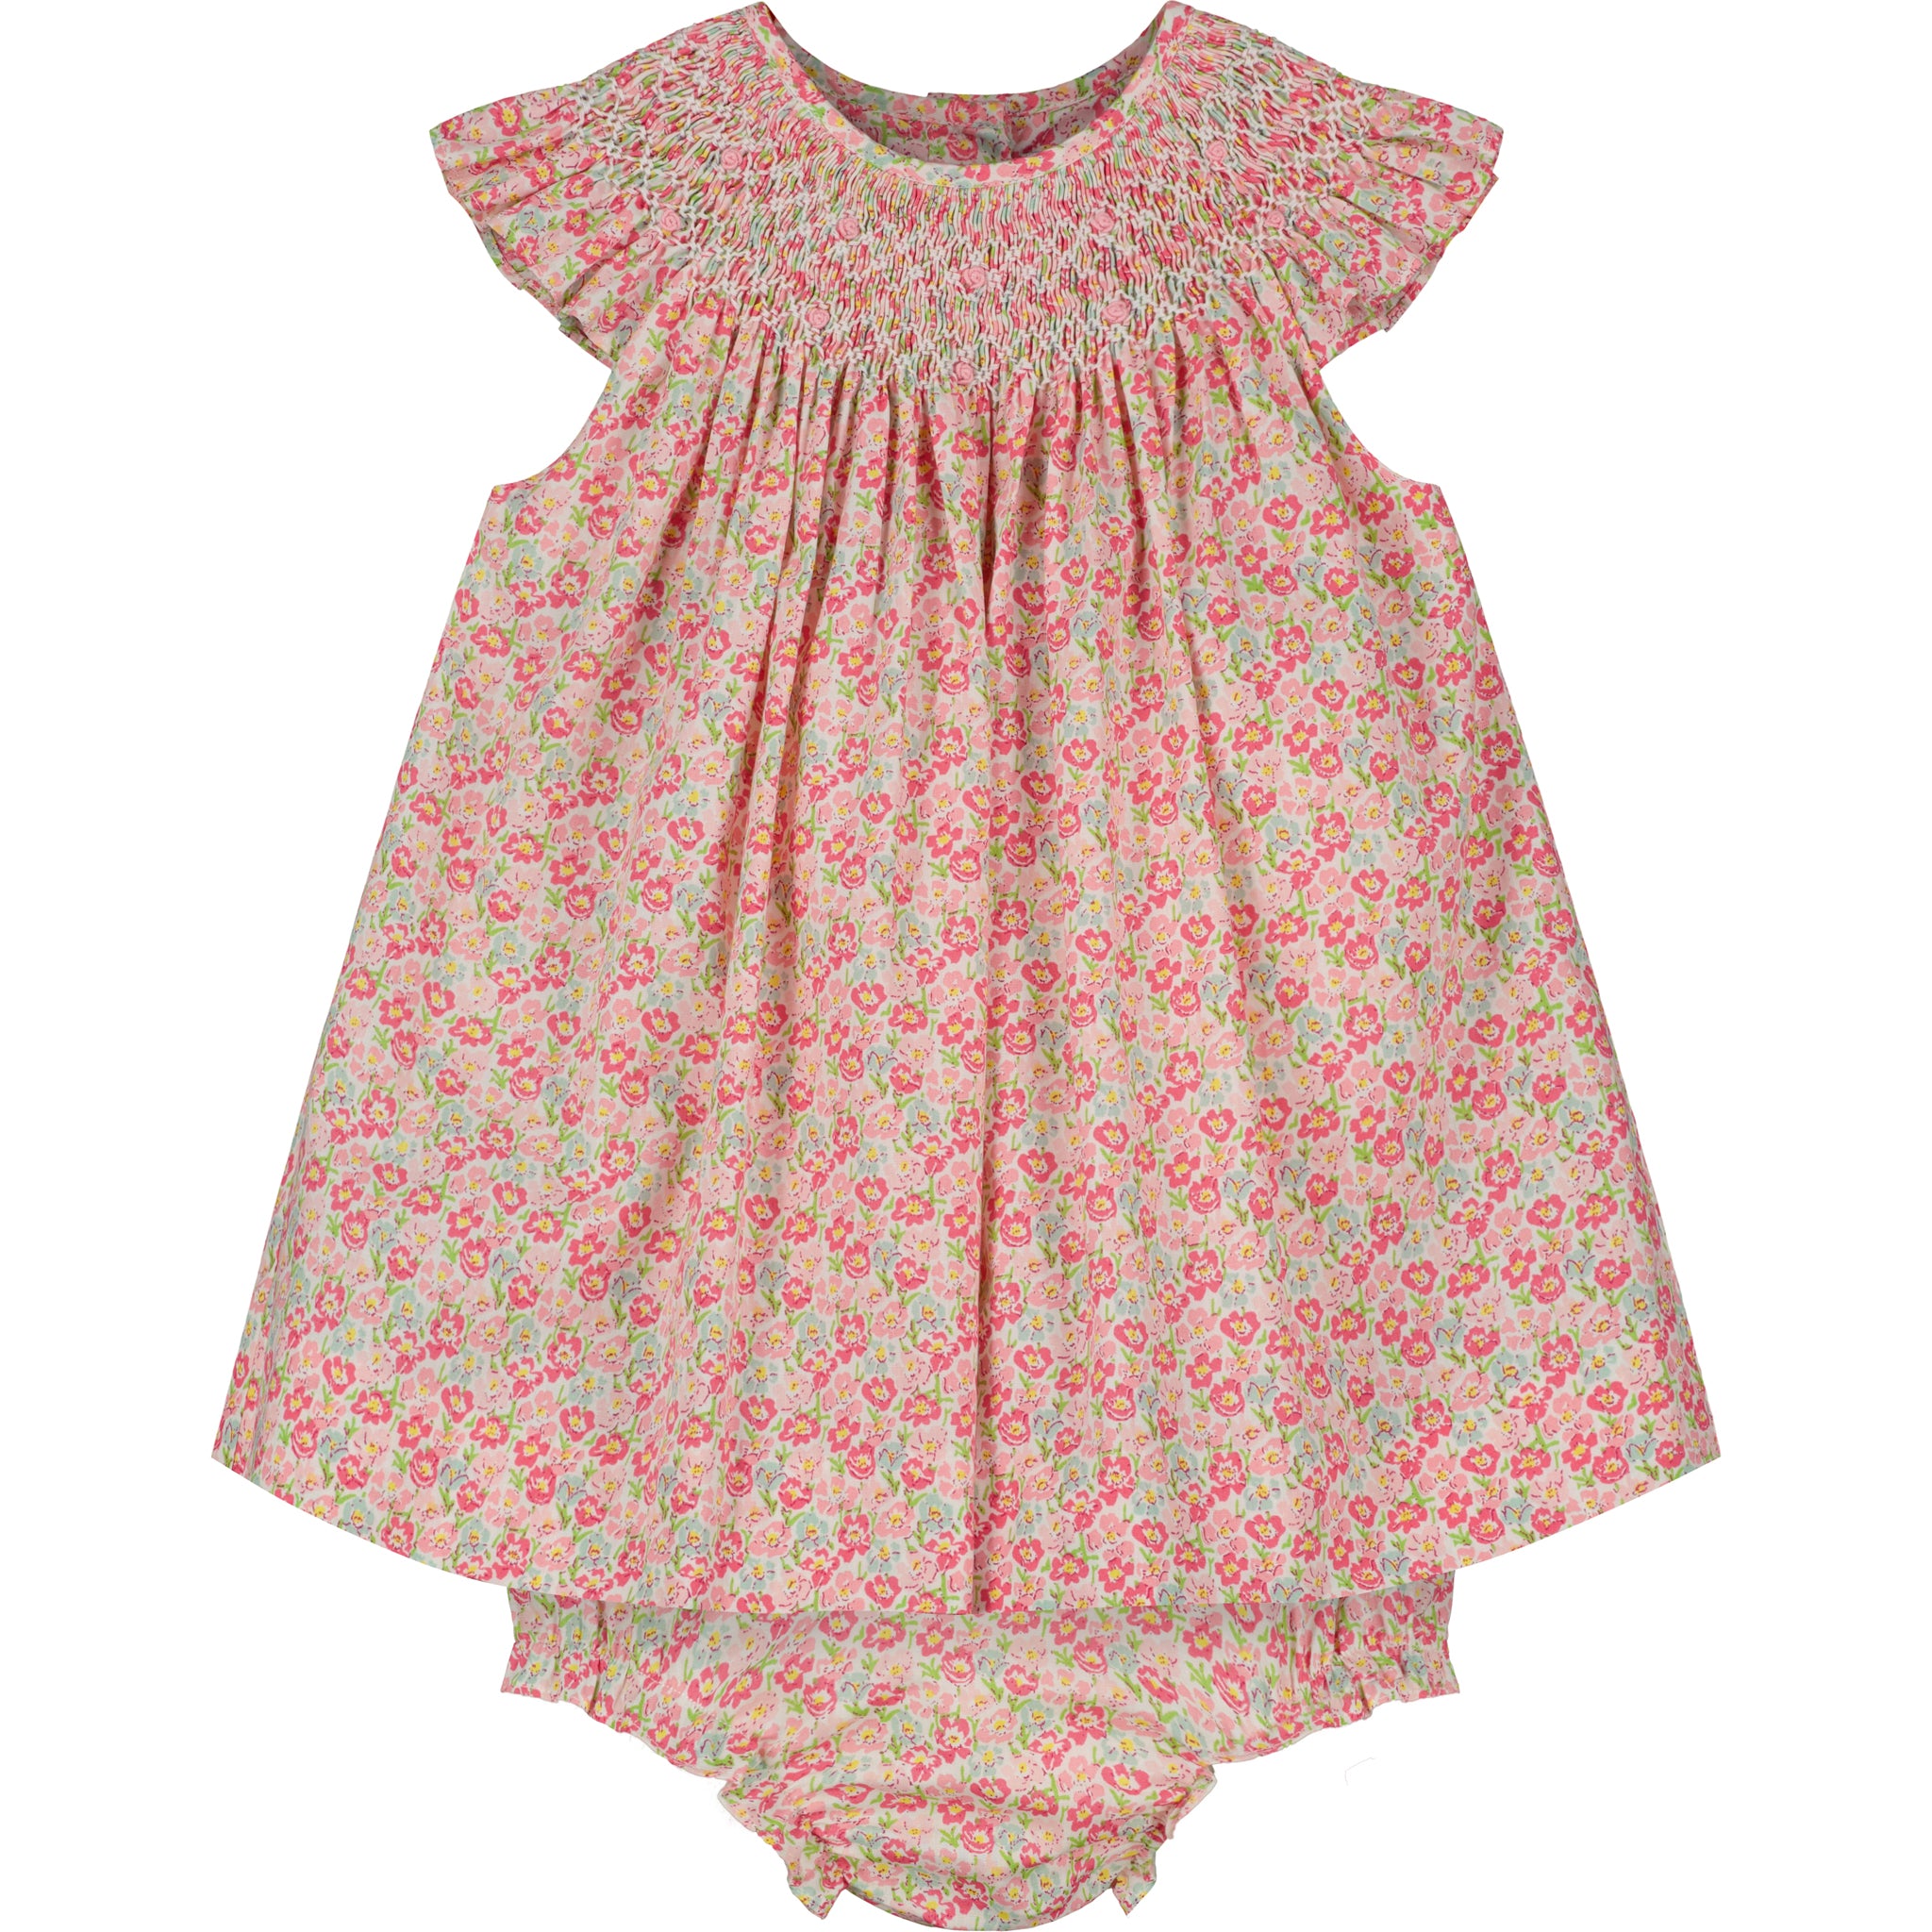 floral baby smock dress with matching bloomers, frill sleeves, front